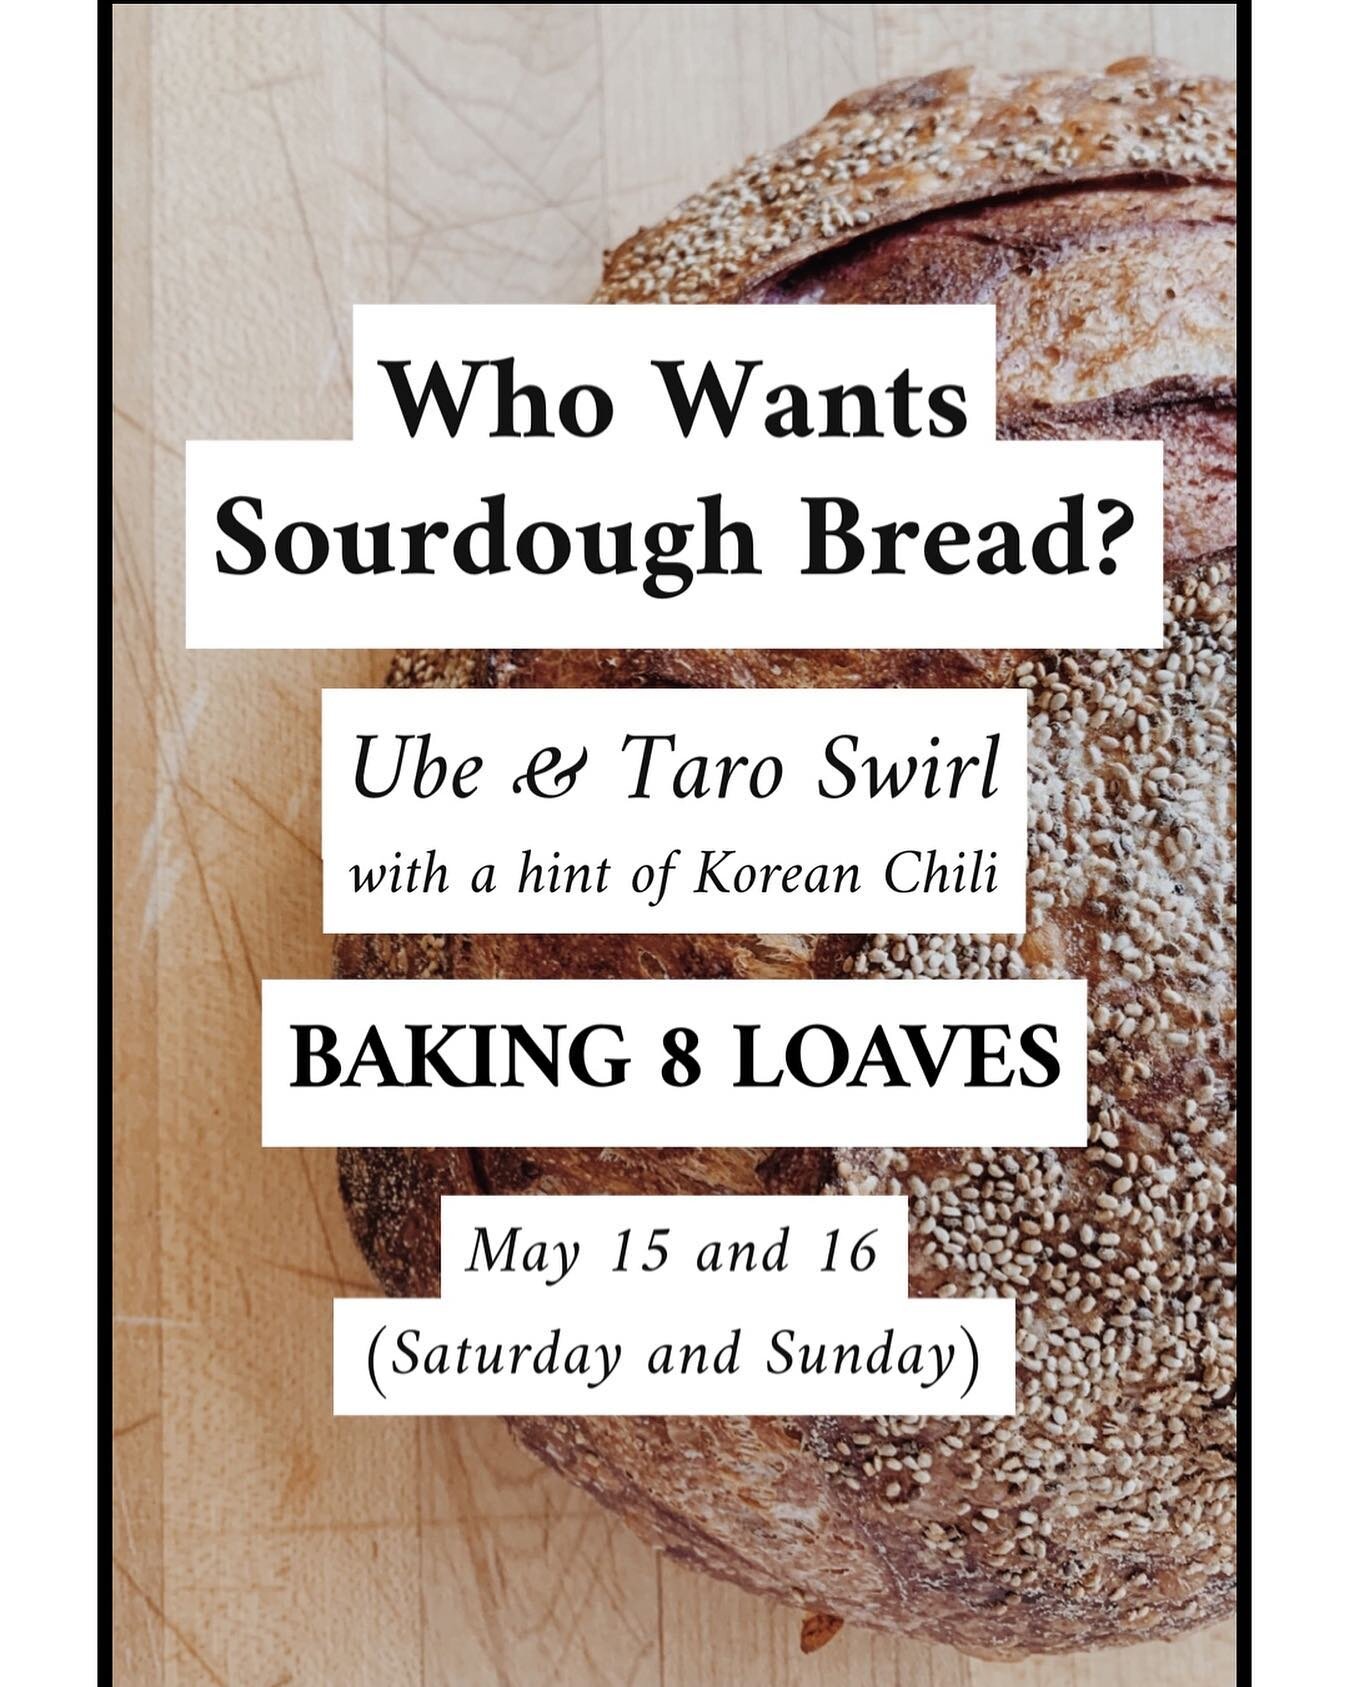 Upping production by making 8 loaves!! 
Since this takes me more than a few days to make I need to know by end of day Wednesday 

Type: Ube and Taro Swirl with some Korean 
  Chili
Cost: $18 dollars
Quantity: 8
When: May 15 and 16 (Saturday and Sunda